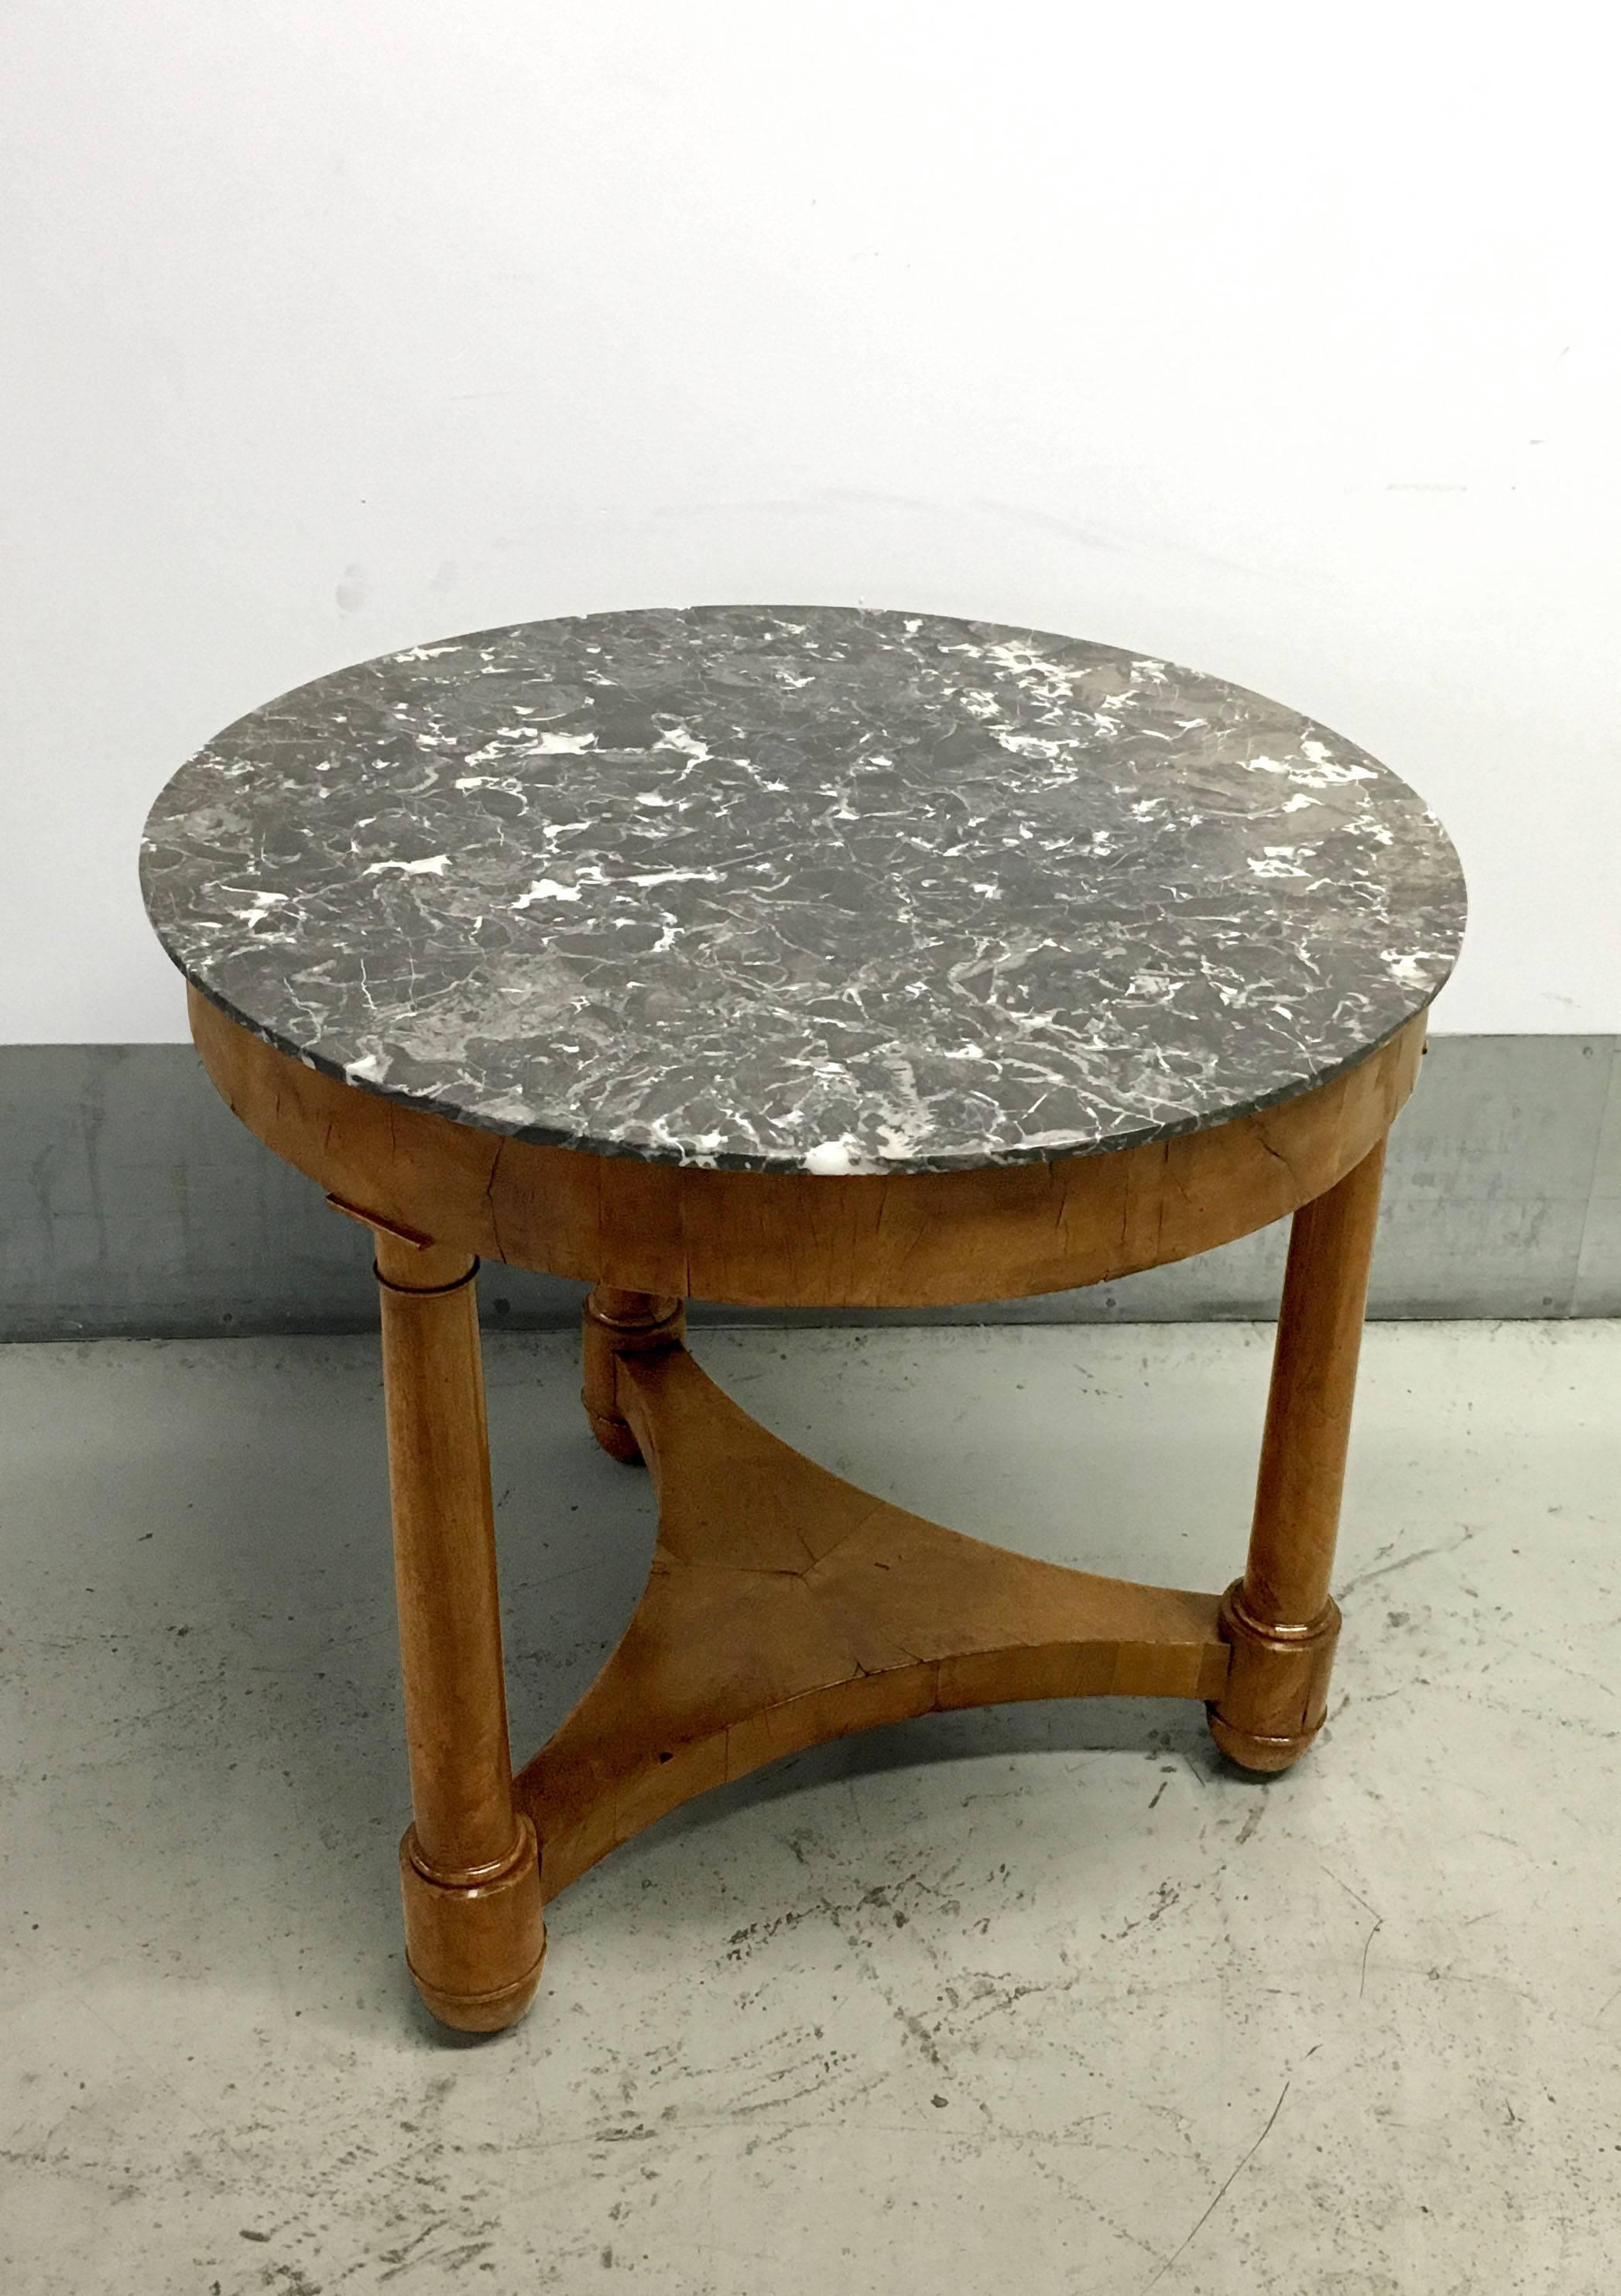 19th century Louis Philippe elmwood round table with marble top. The base is comprised of three tapered legs with a triangular support shelf. The gray marble top has white veining and the elmwood is burled and figural.